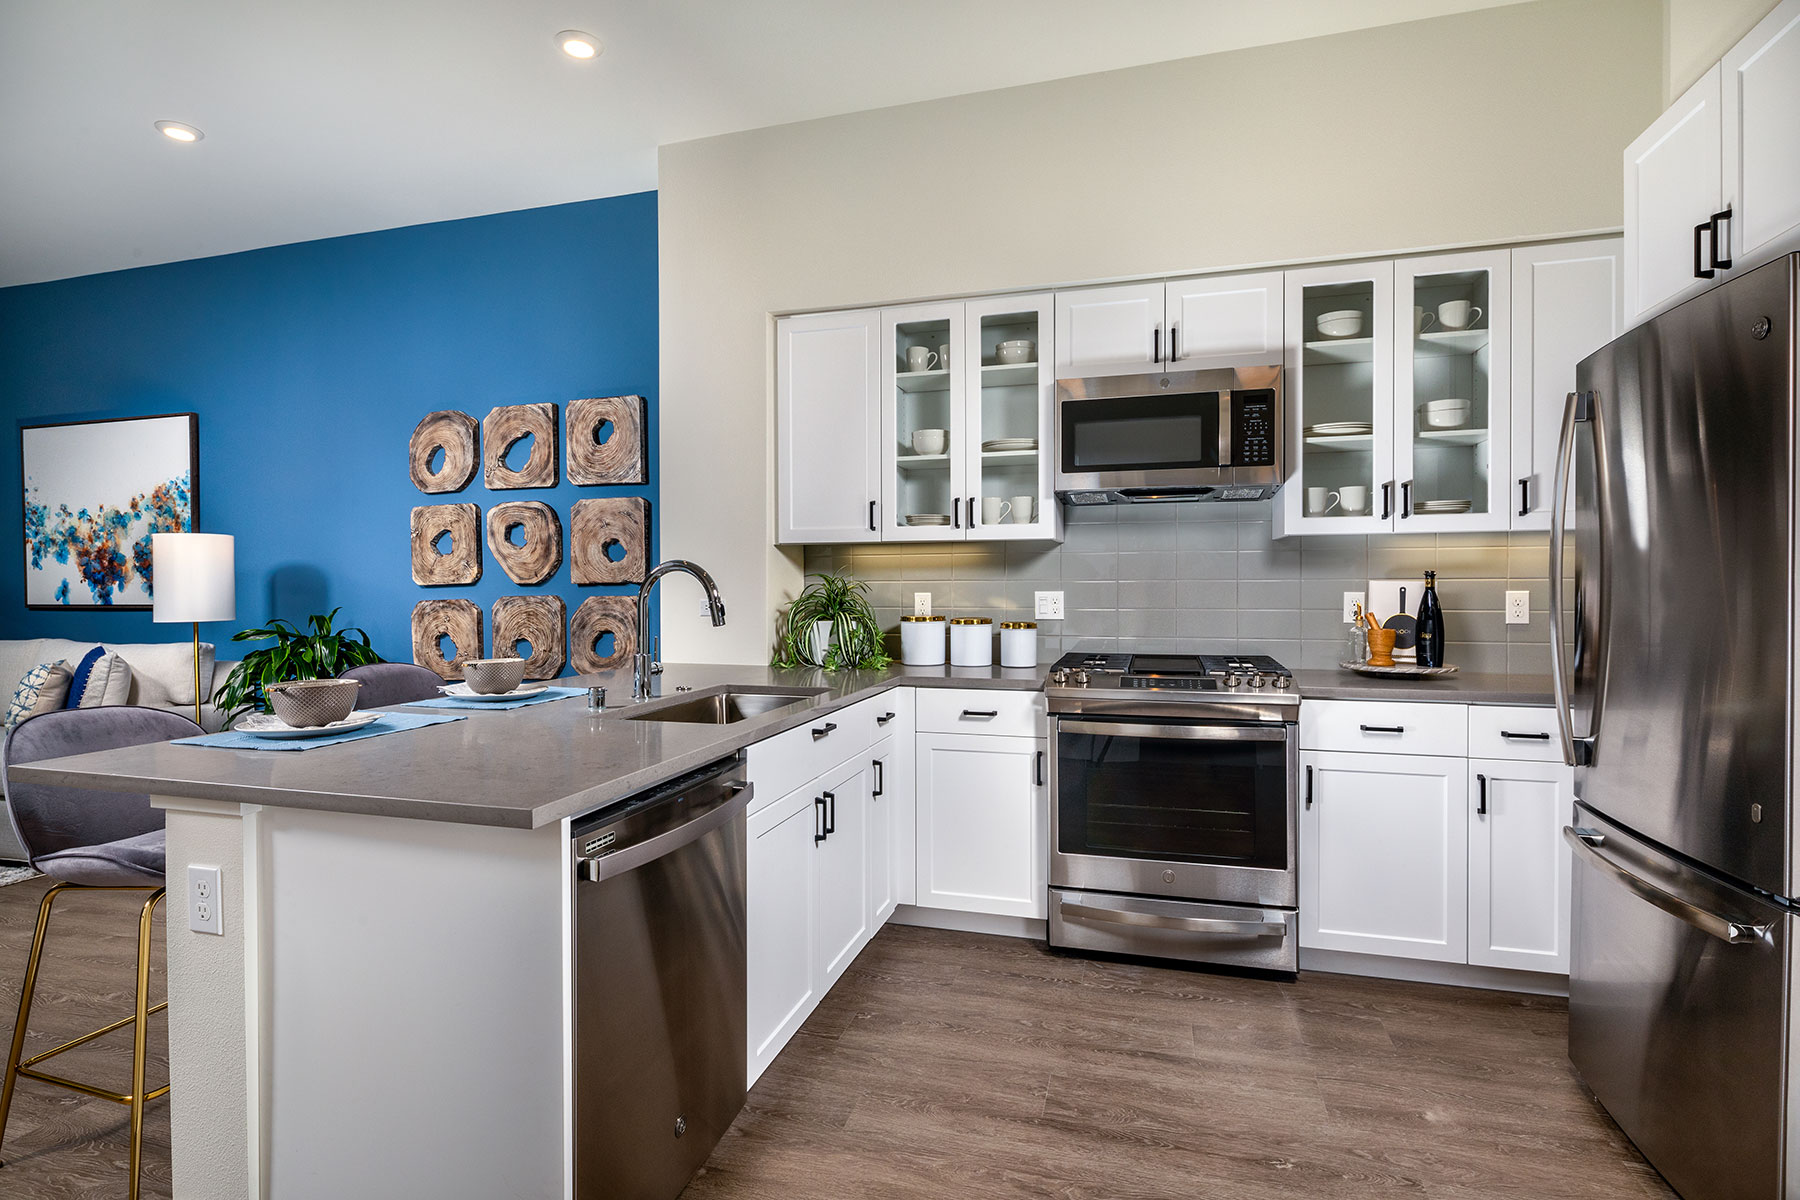 San Mateo Apartments for Rent - Azara - Kitchen with White Cabinets, Glass Door Cupboards, Grey Quartz Countertops, and Stainless Steel Appliances.